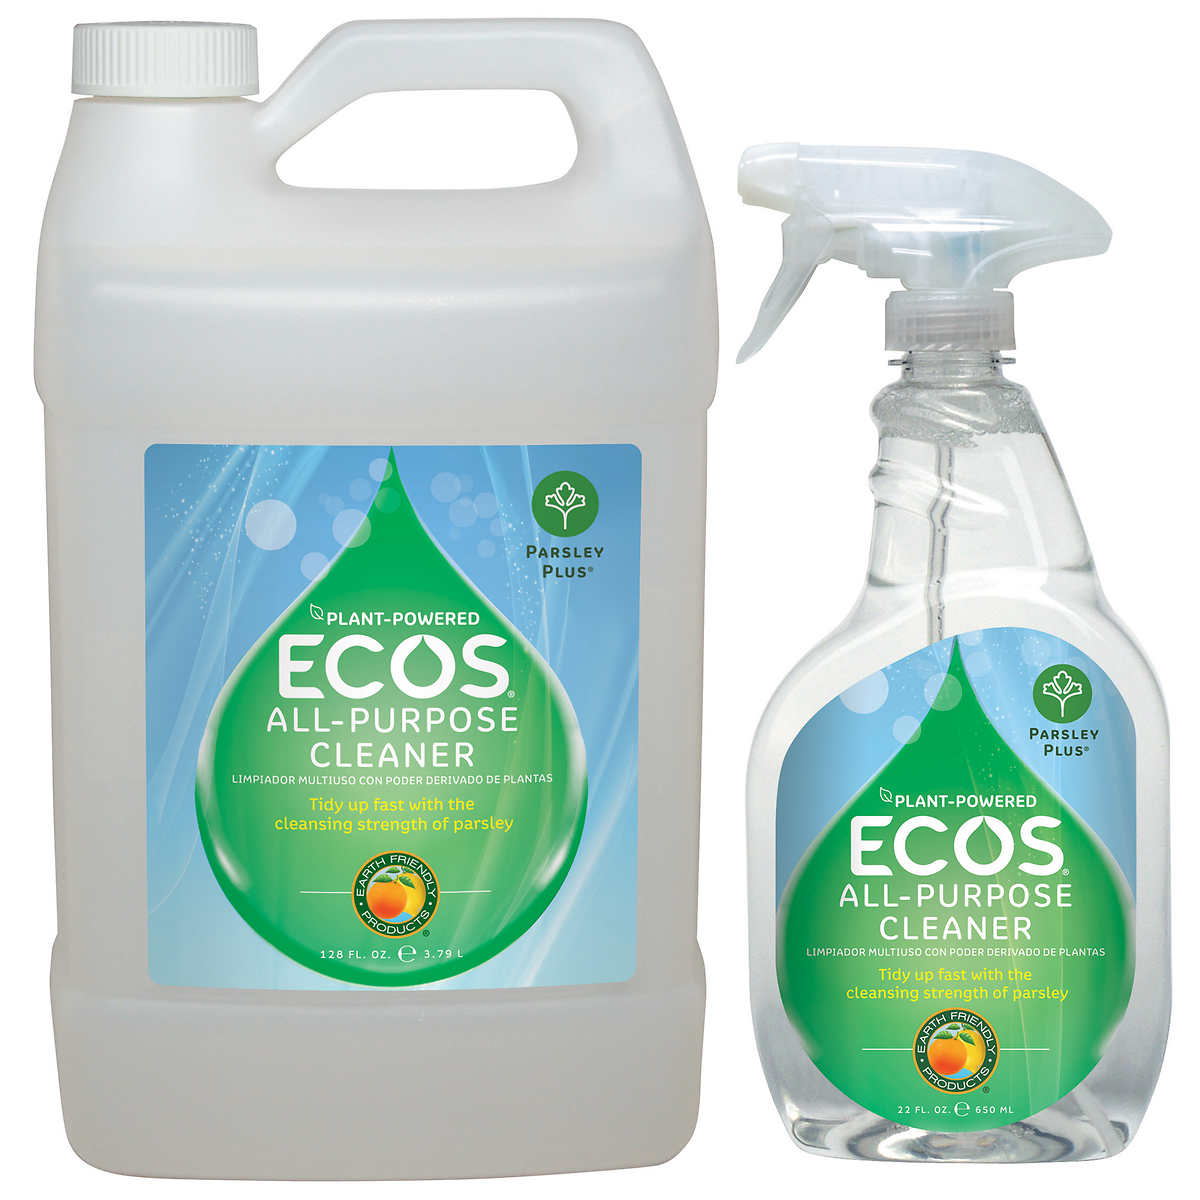 All Purpose Cleaner - Tru Eco by VivaGreen - 100ml Refill – Minimal Waste  Grocery